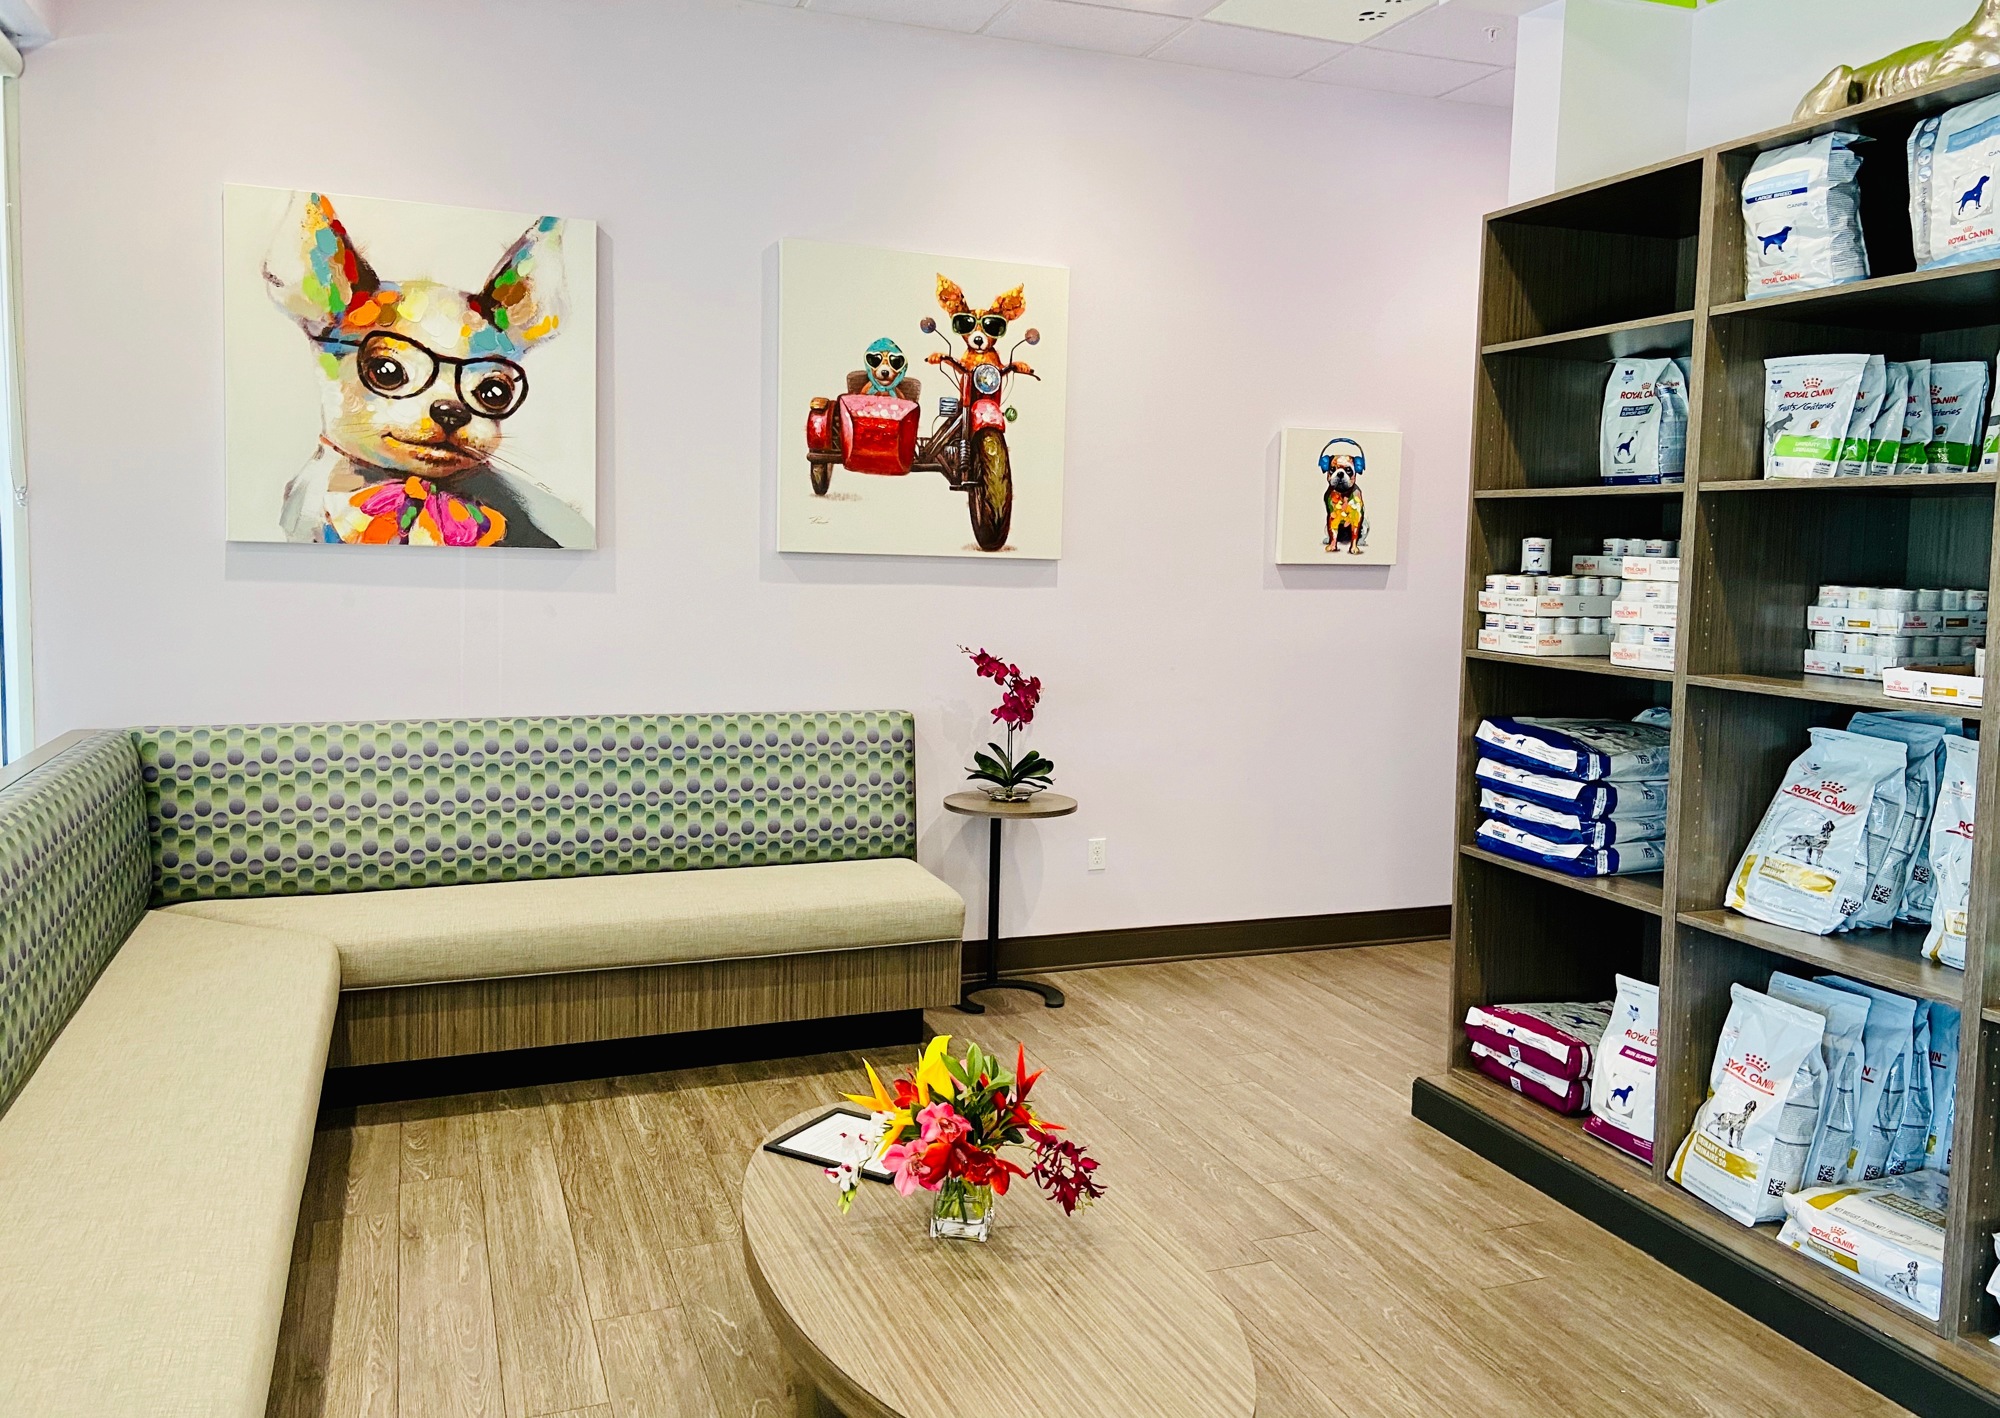 Courtesy. Dr. Dave Smith, veterinarian, owner of Sarasota Veterinary Center and co-owner of Parkway Veterinary Center says doubling the number of exam rooms at Sarasota Veterinary Center helped him handle the rush of new patients.